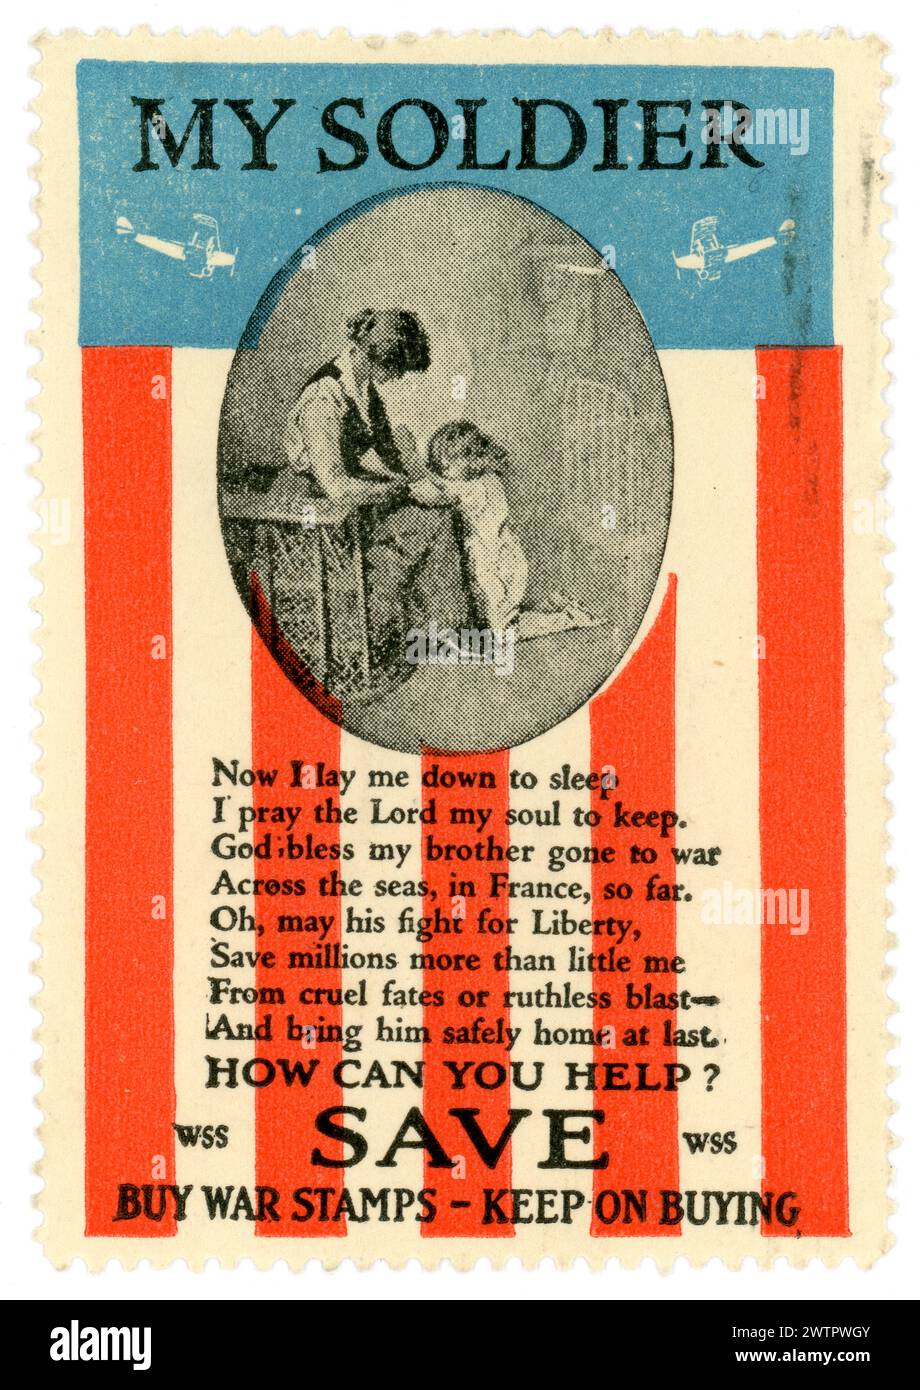 Original WW1 era American World War one savings stamps, patriotic image of USA stripes, poignant / propaganda image of child kneeling next to mother, planes. Title: My Soldier. Buy War Stamps Keep on Buying. Artwork by Hiram Harold Green, 1917. Printed by Matthews-Northrup & Co. WW1 War Savings Stamps W.S.S. could be purchased for 25 cents and, when enough were accumulated, they could be traded in for war bonds. This poster was created by American artist Hiram Harold Green in 1917. Stock Photo